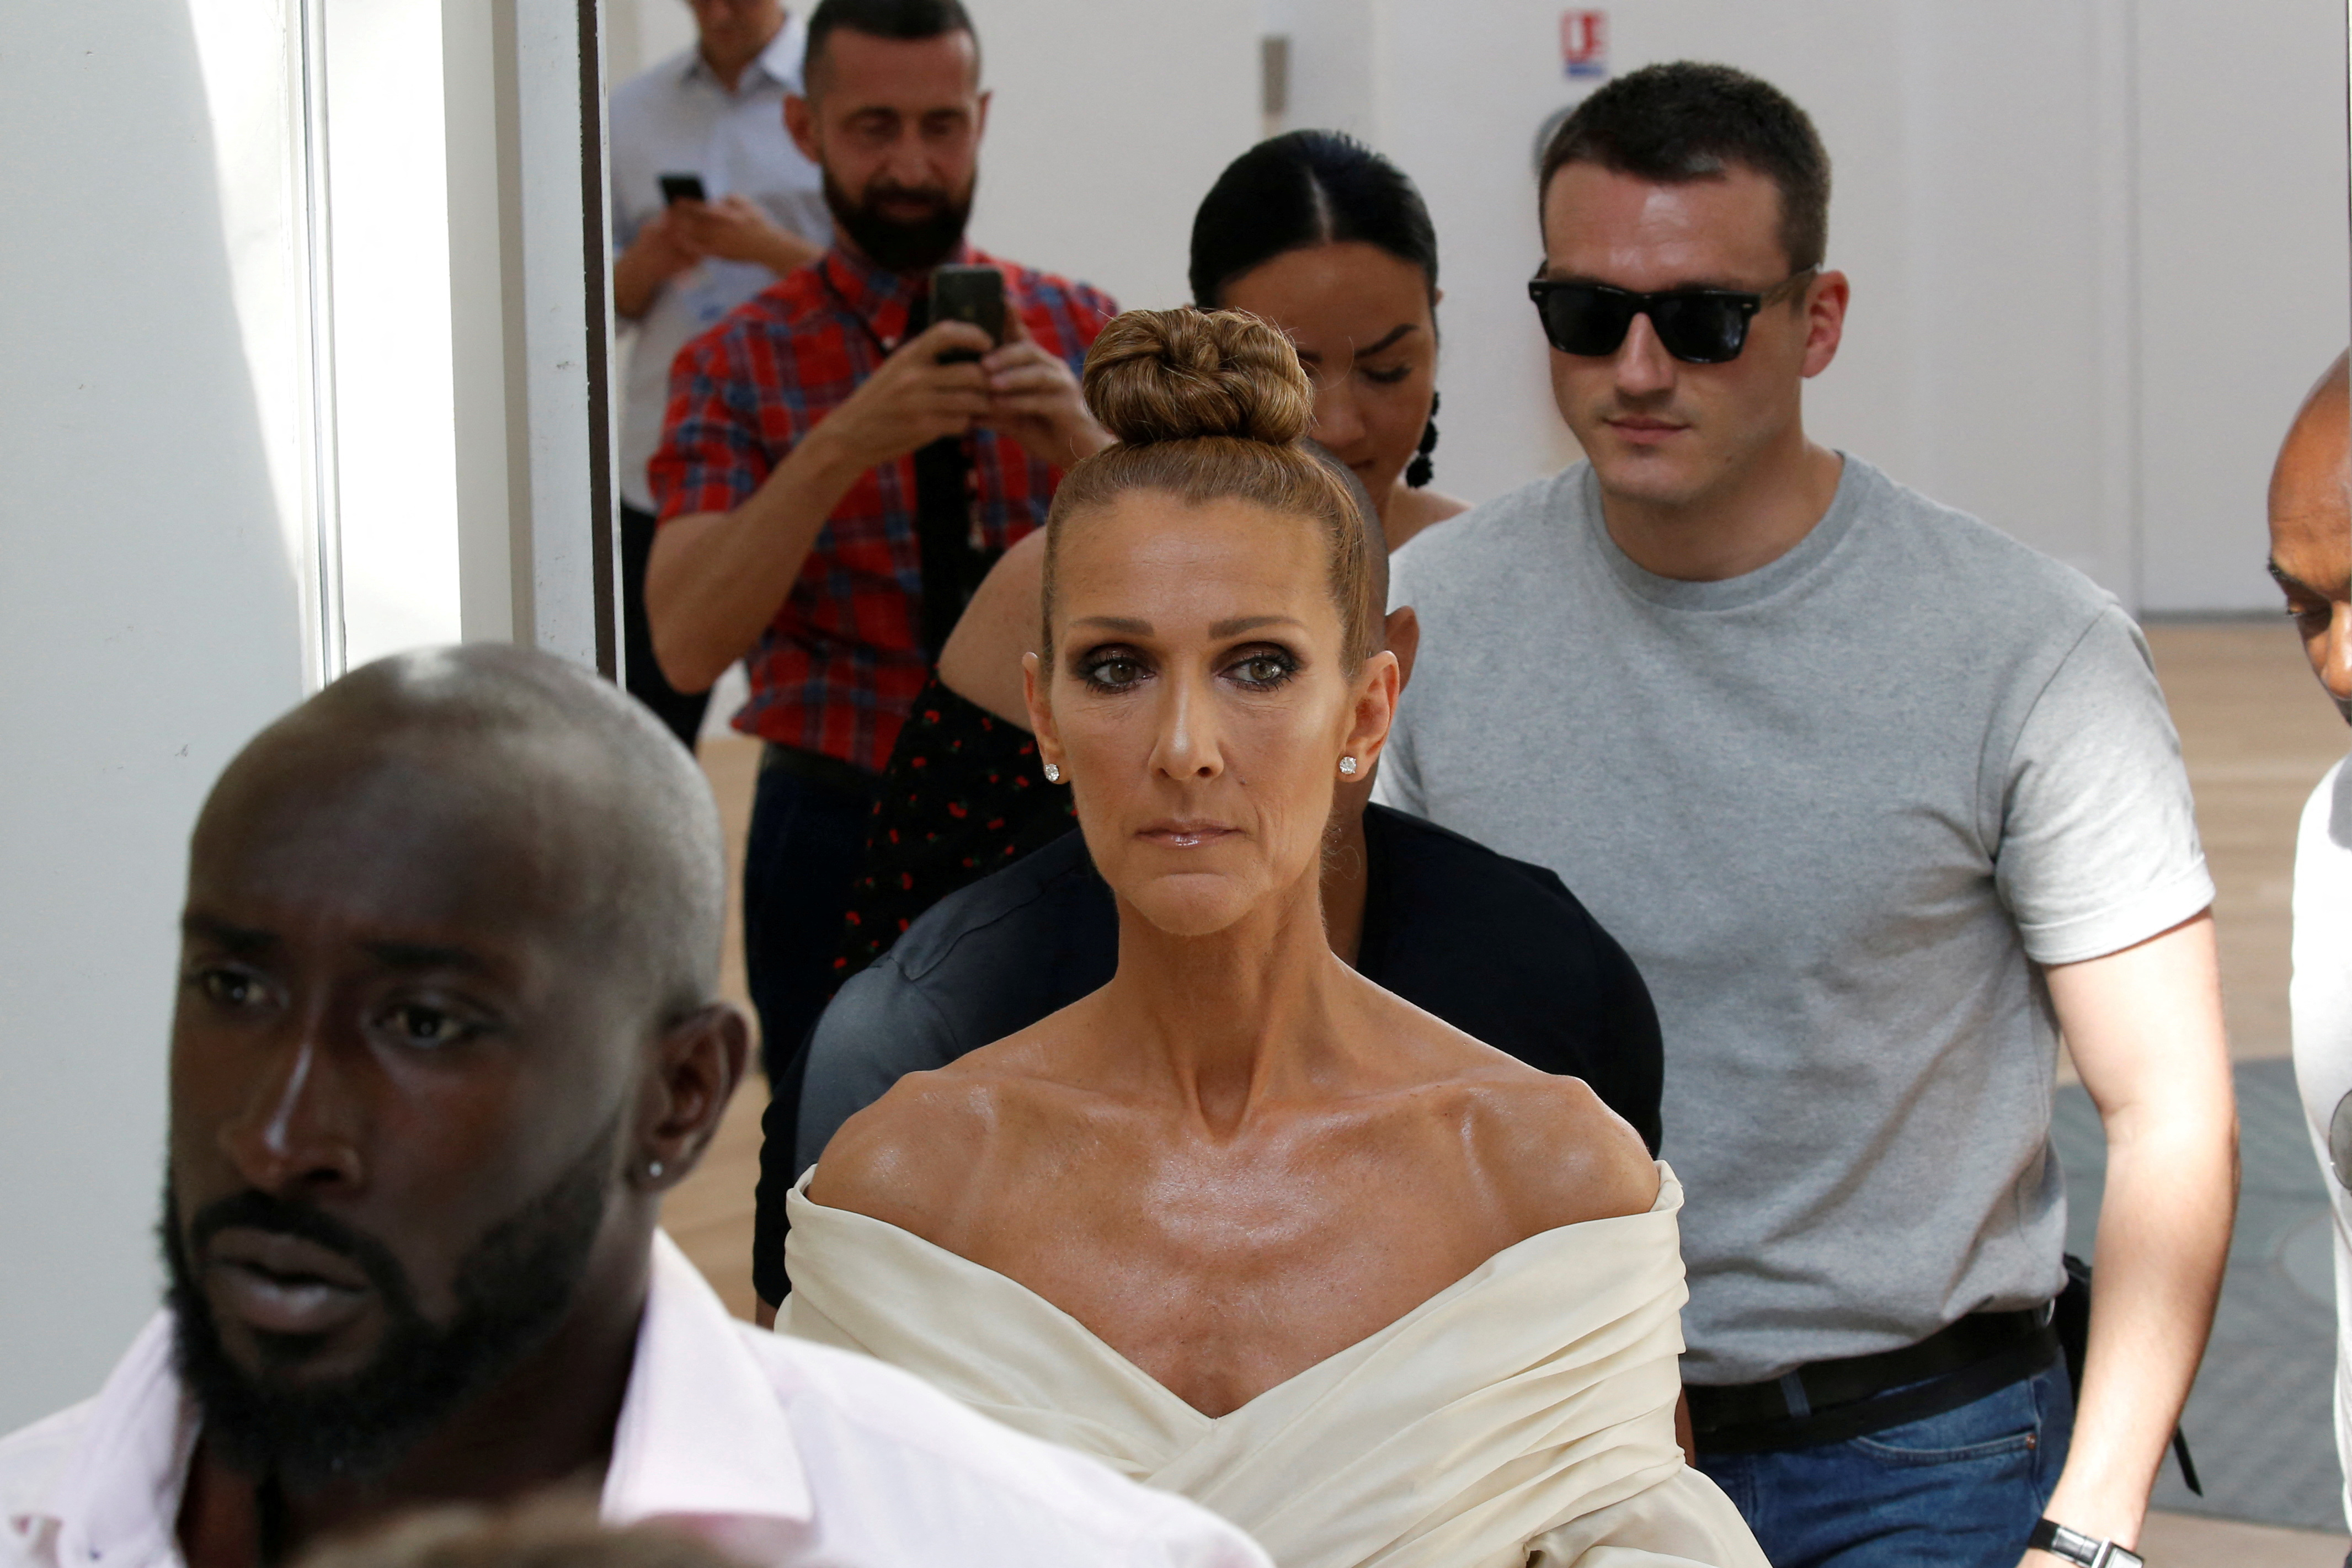 Singer Celine Dion and Pepe Munoz arrive to attend the Haute Couture Fall/Winter 2019/20 collection show by designer Alexandre Vauthier in Paris